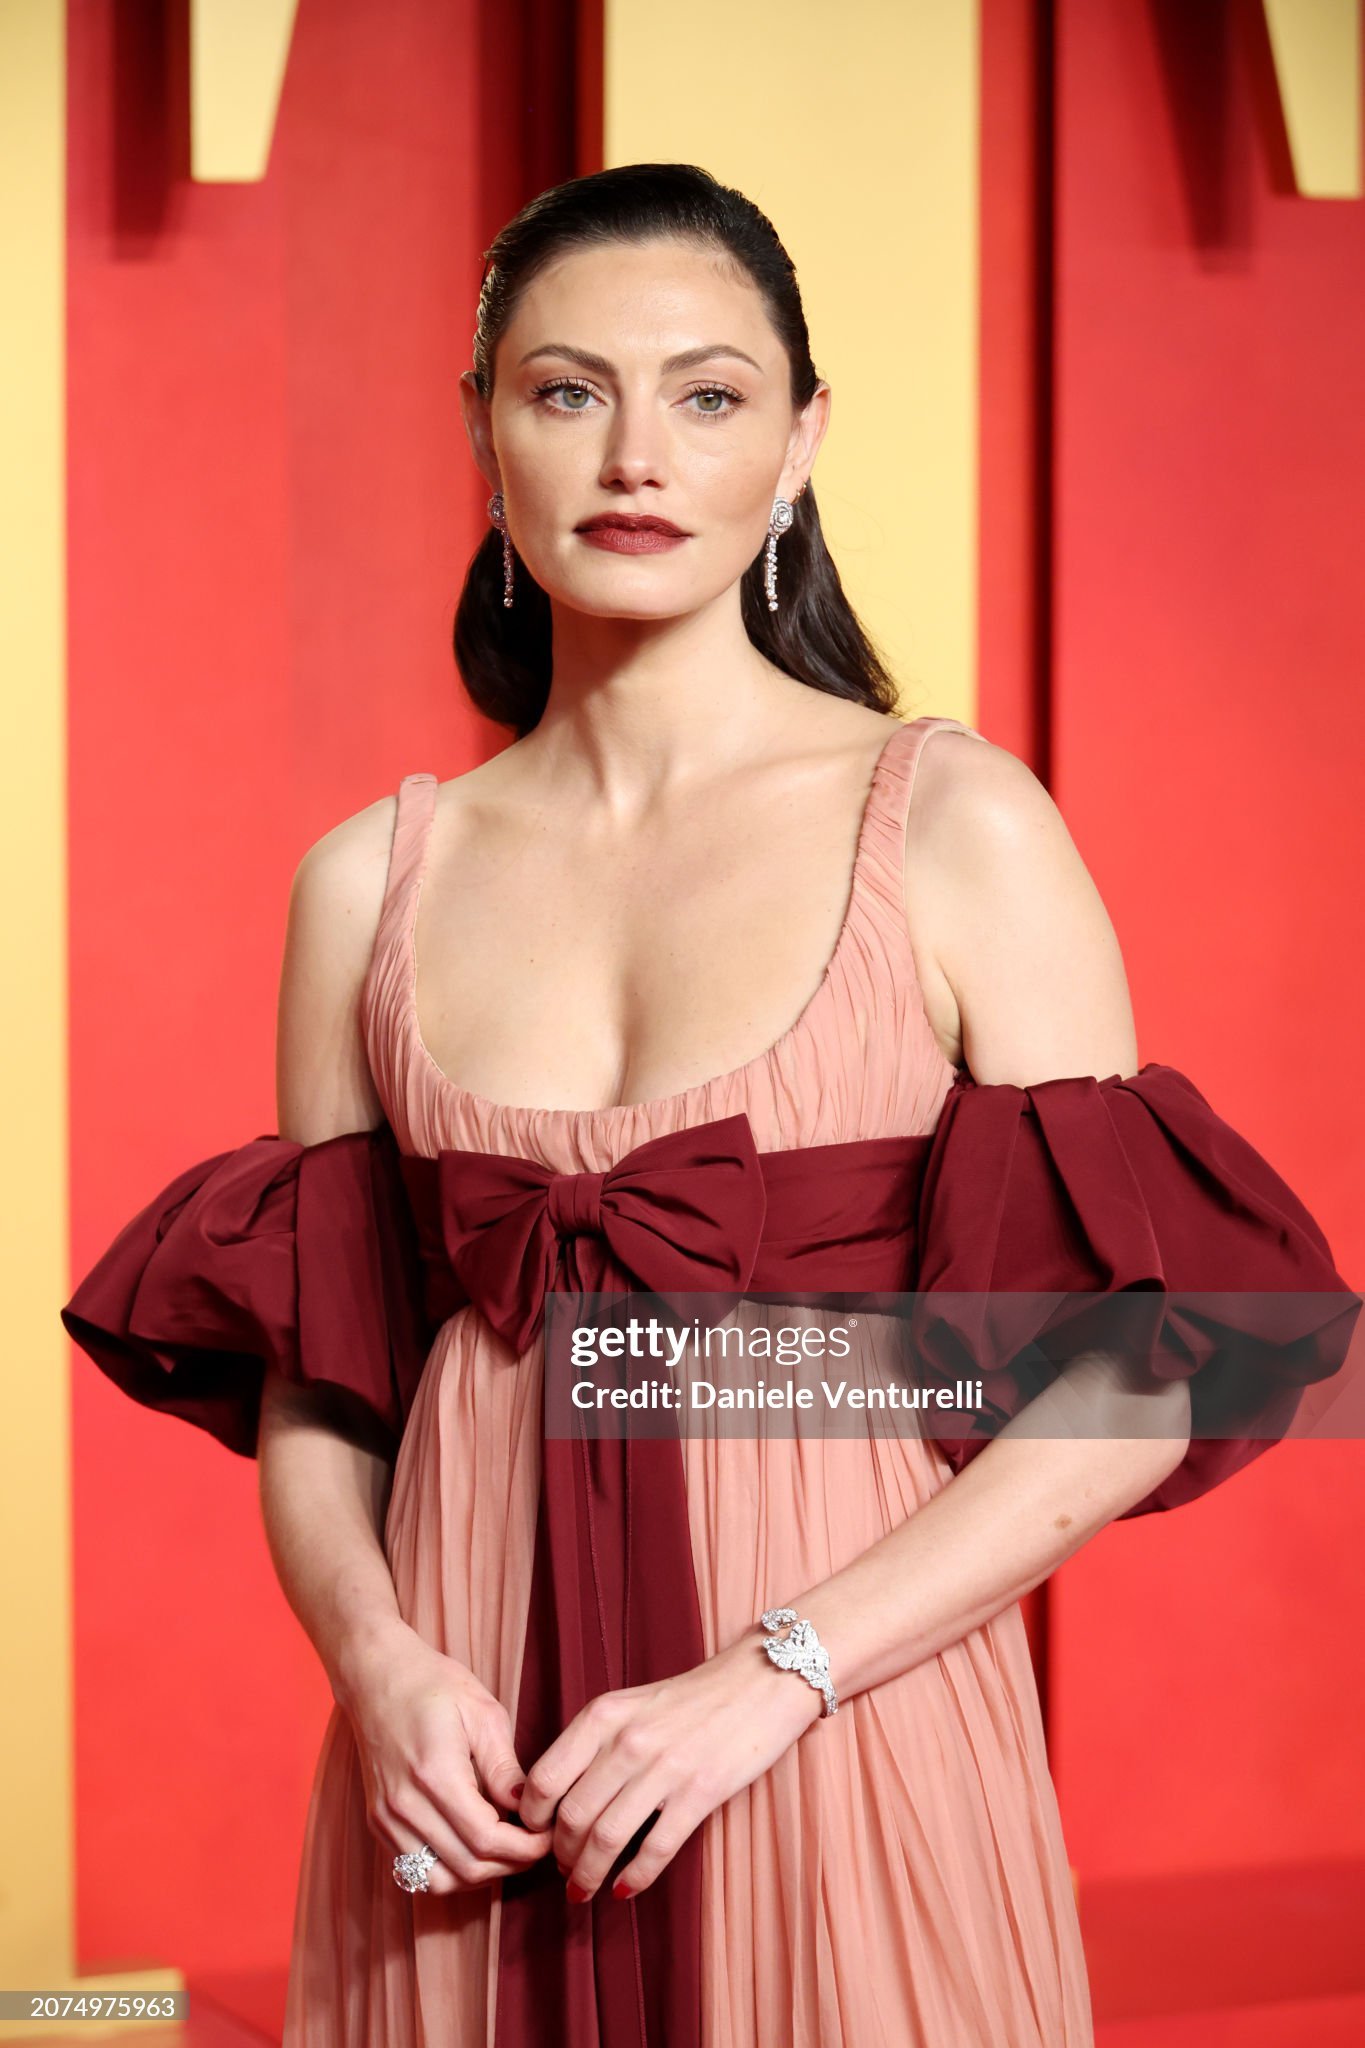 gettyimages-2074975963-2048x2048.jpg